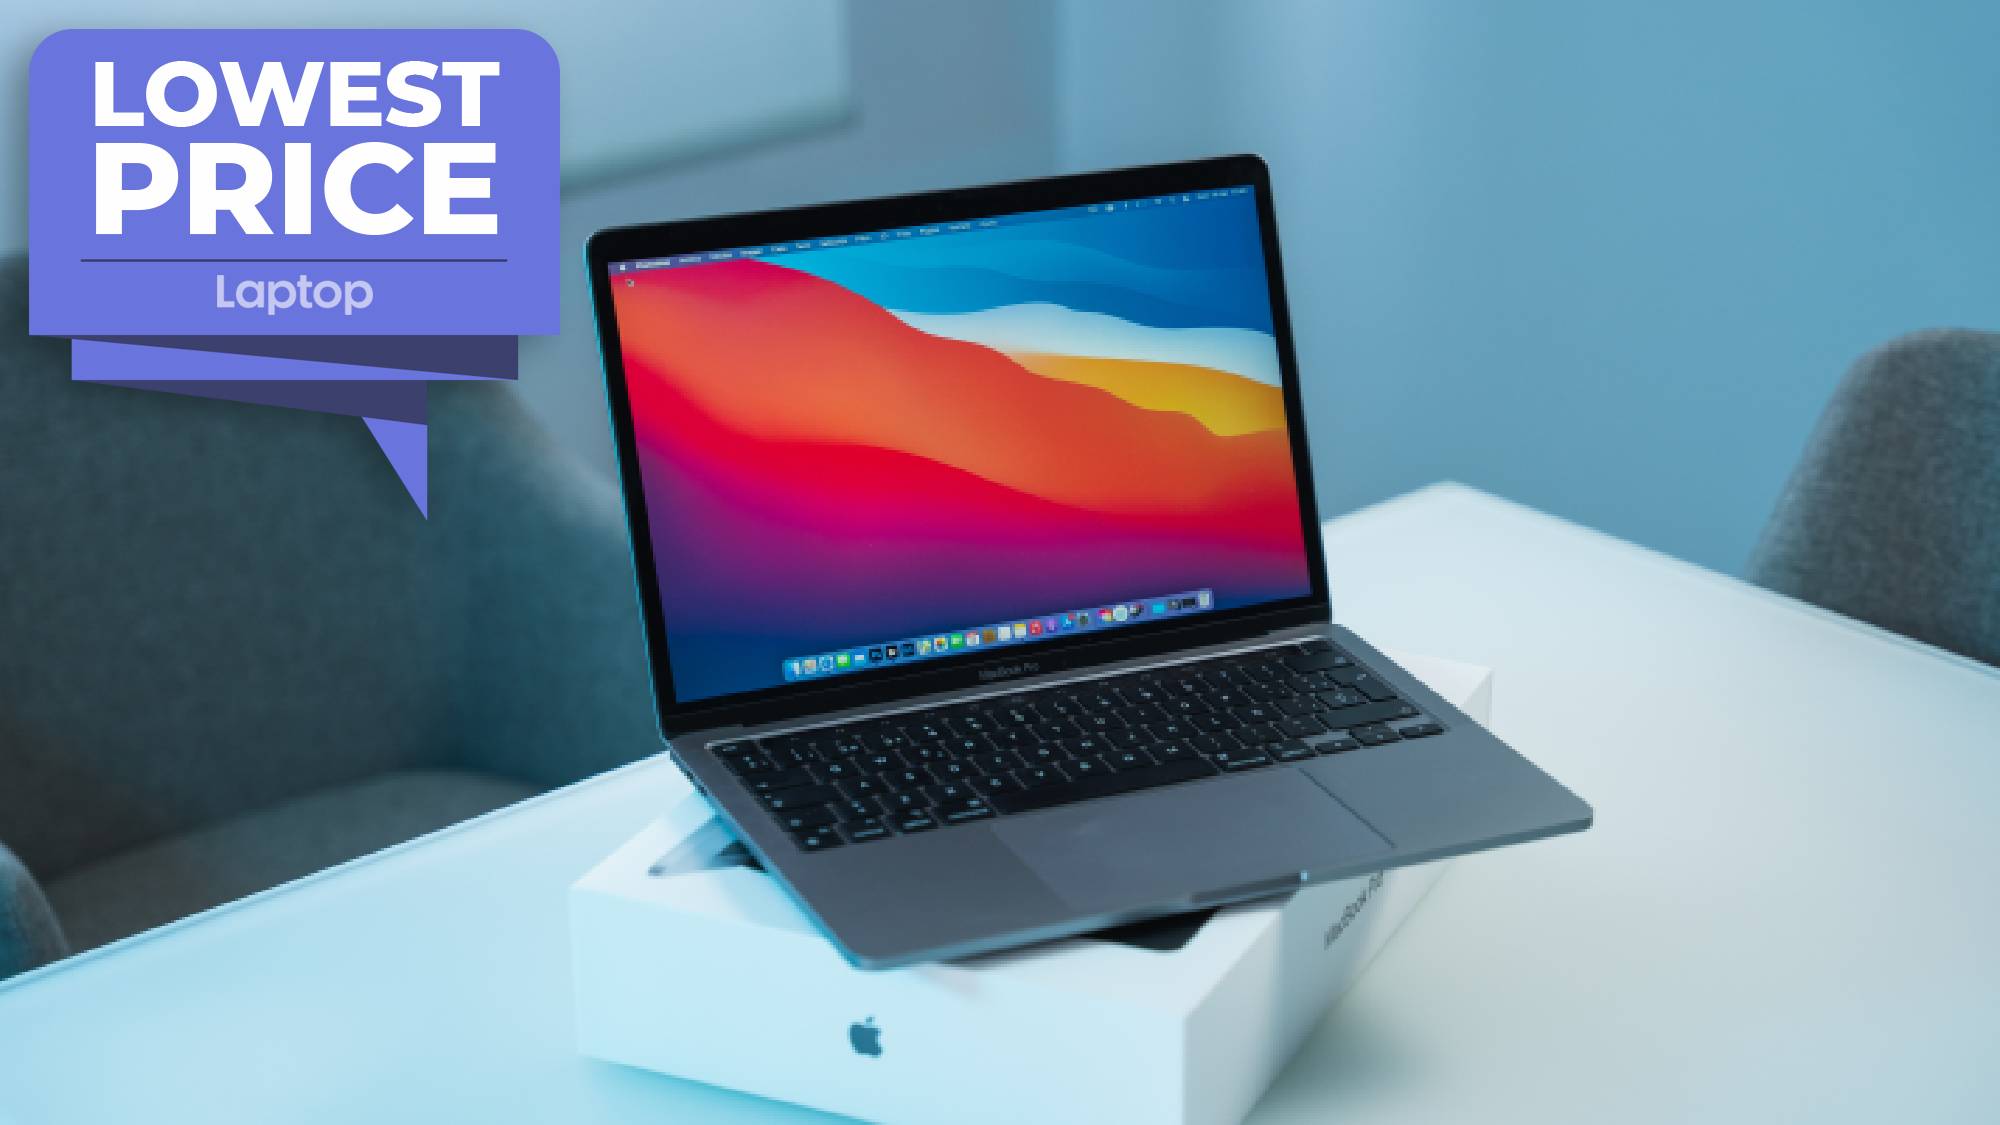 MacBook Air M1 with 512GB SSD plummets to $1,149 — lowest price ever! | Laptop Mag